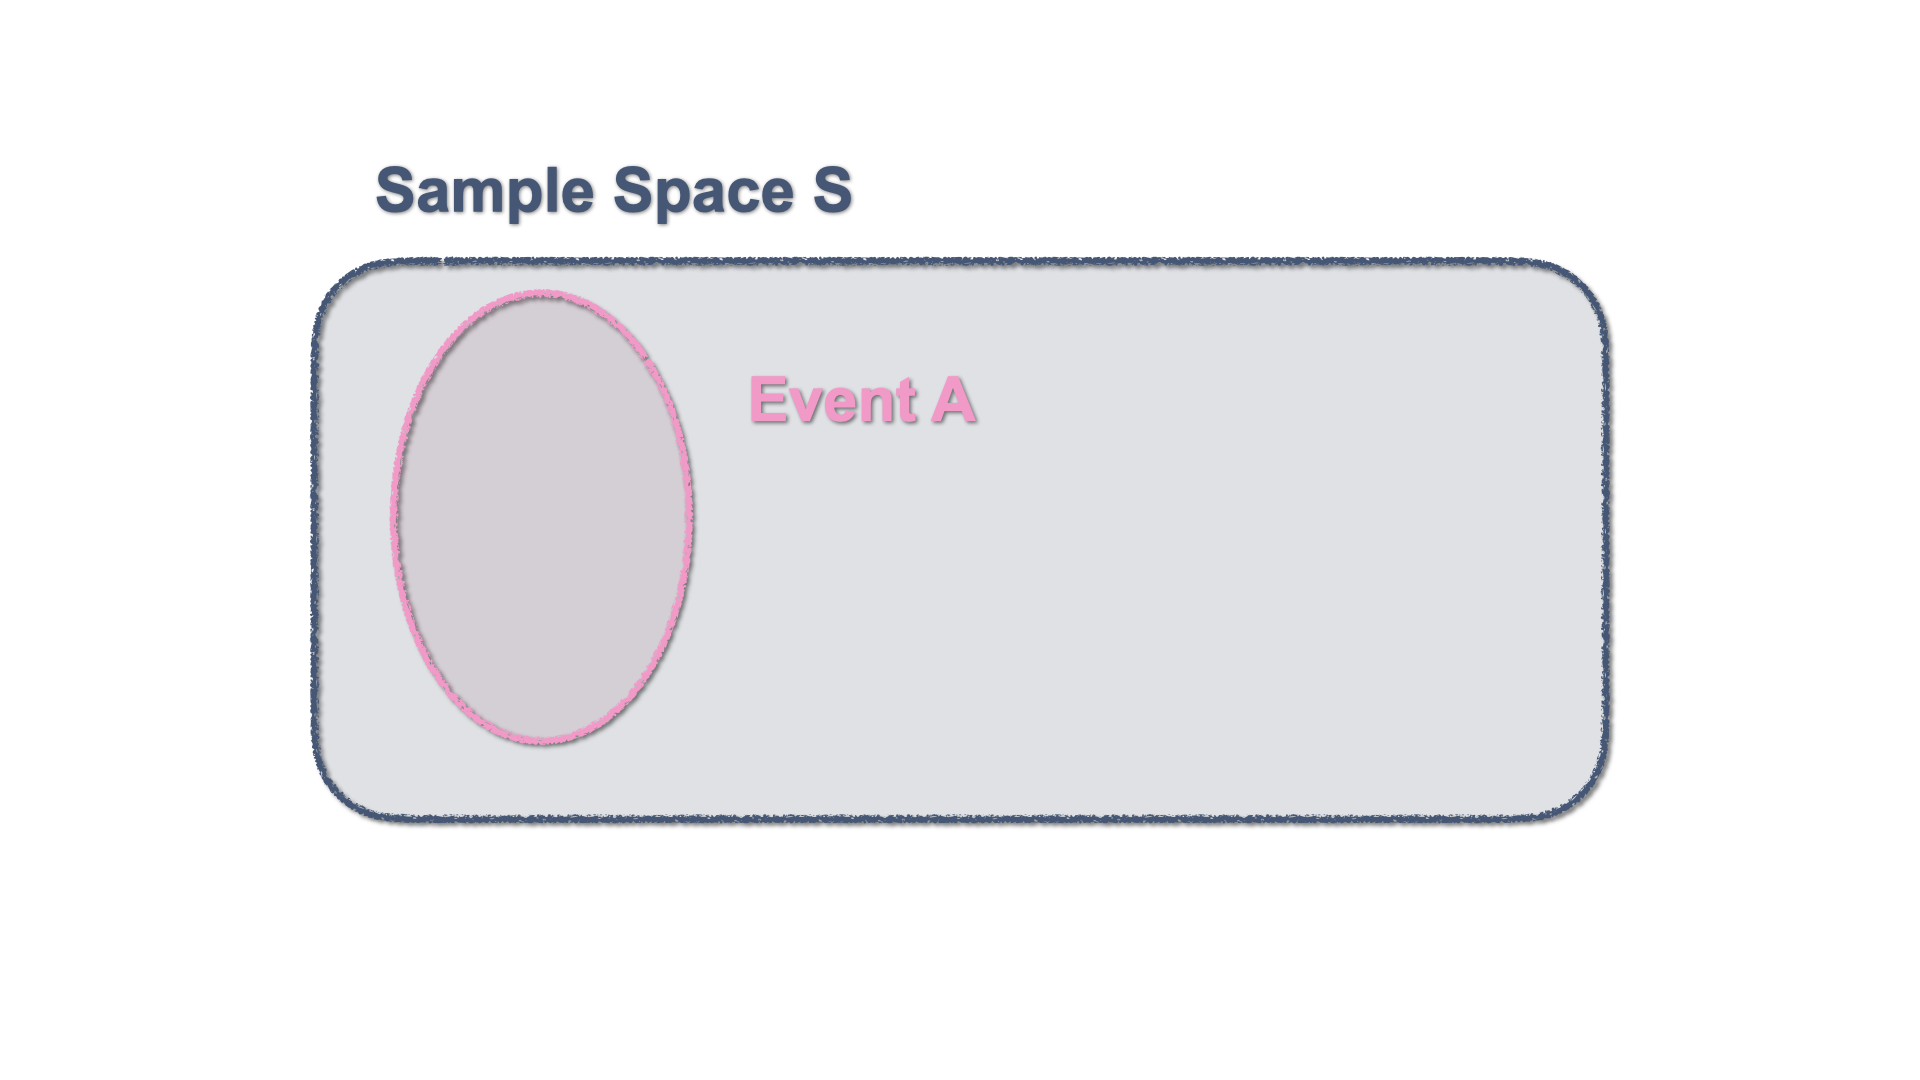 Venn Diagram - An event within the Sample Space